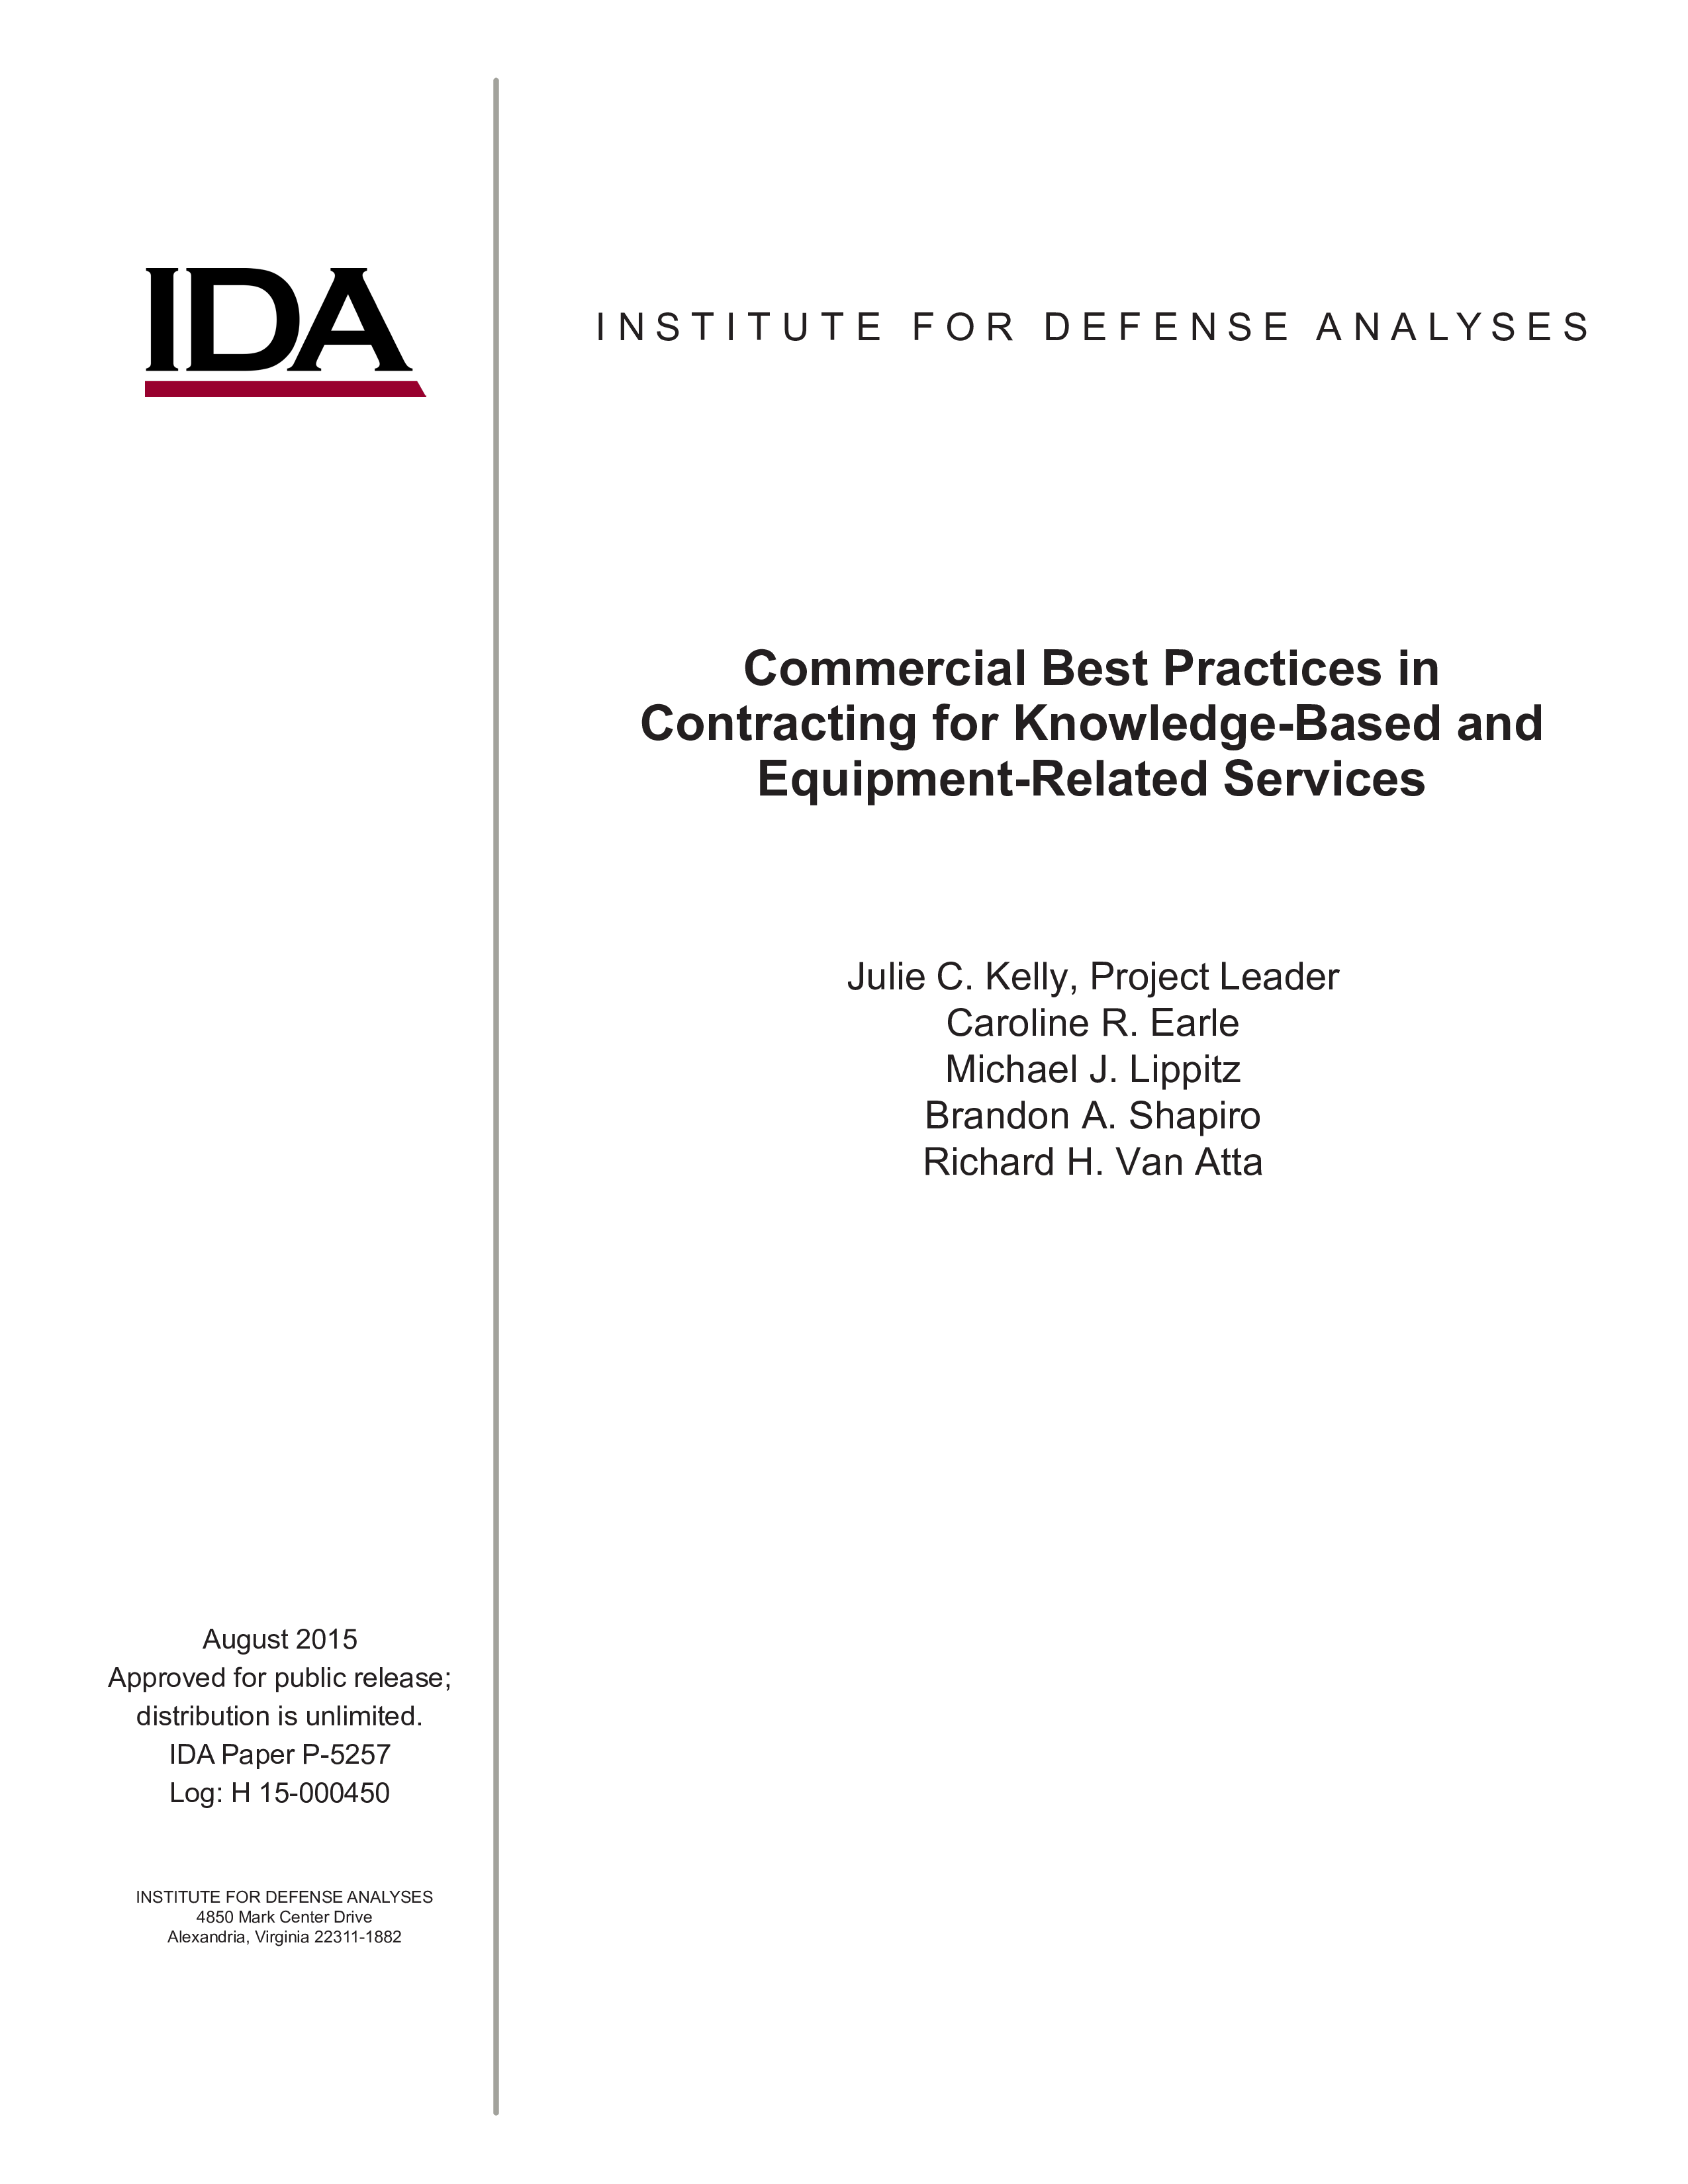 Commercial Best Practices in Contracting for Knowledge-Based and Equipment-Related Services